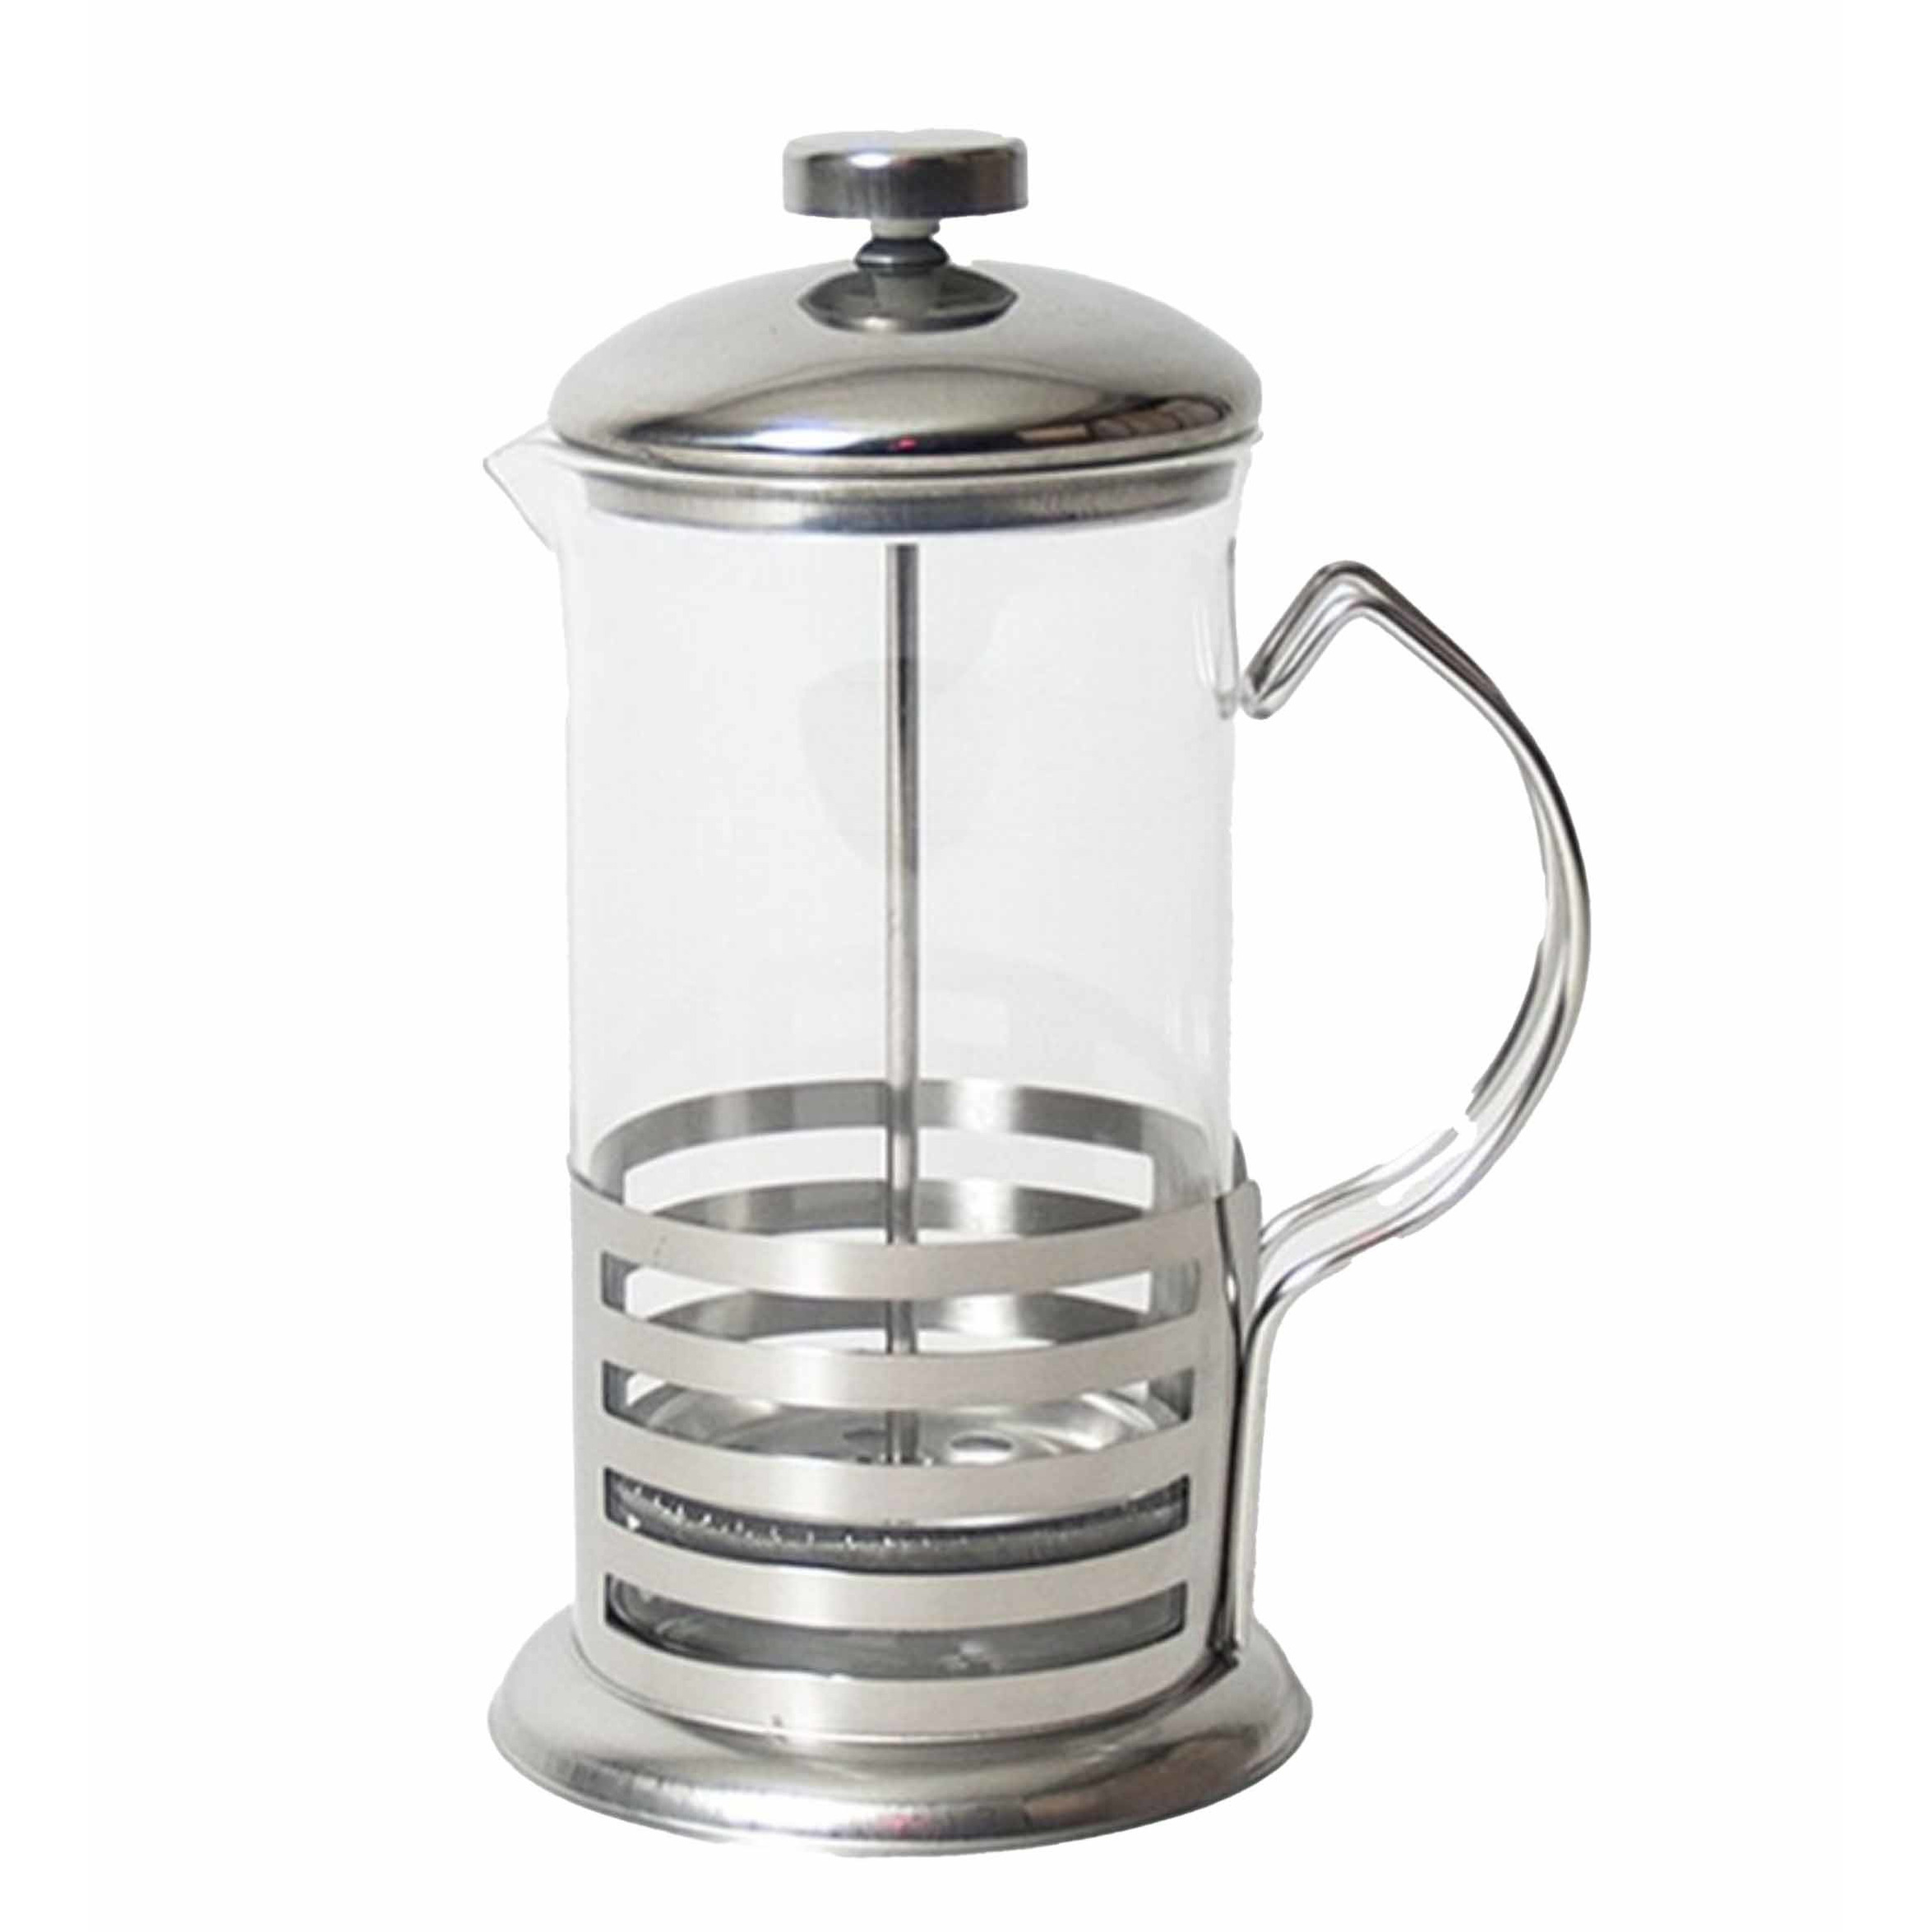 French press koffie-thee maker- cafetiere glas-RVS 600 ml